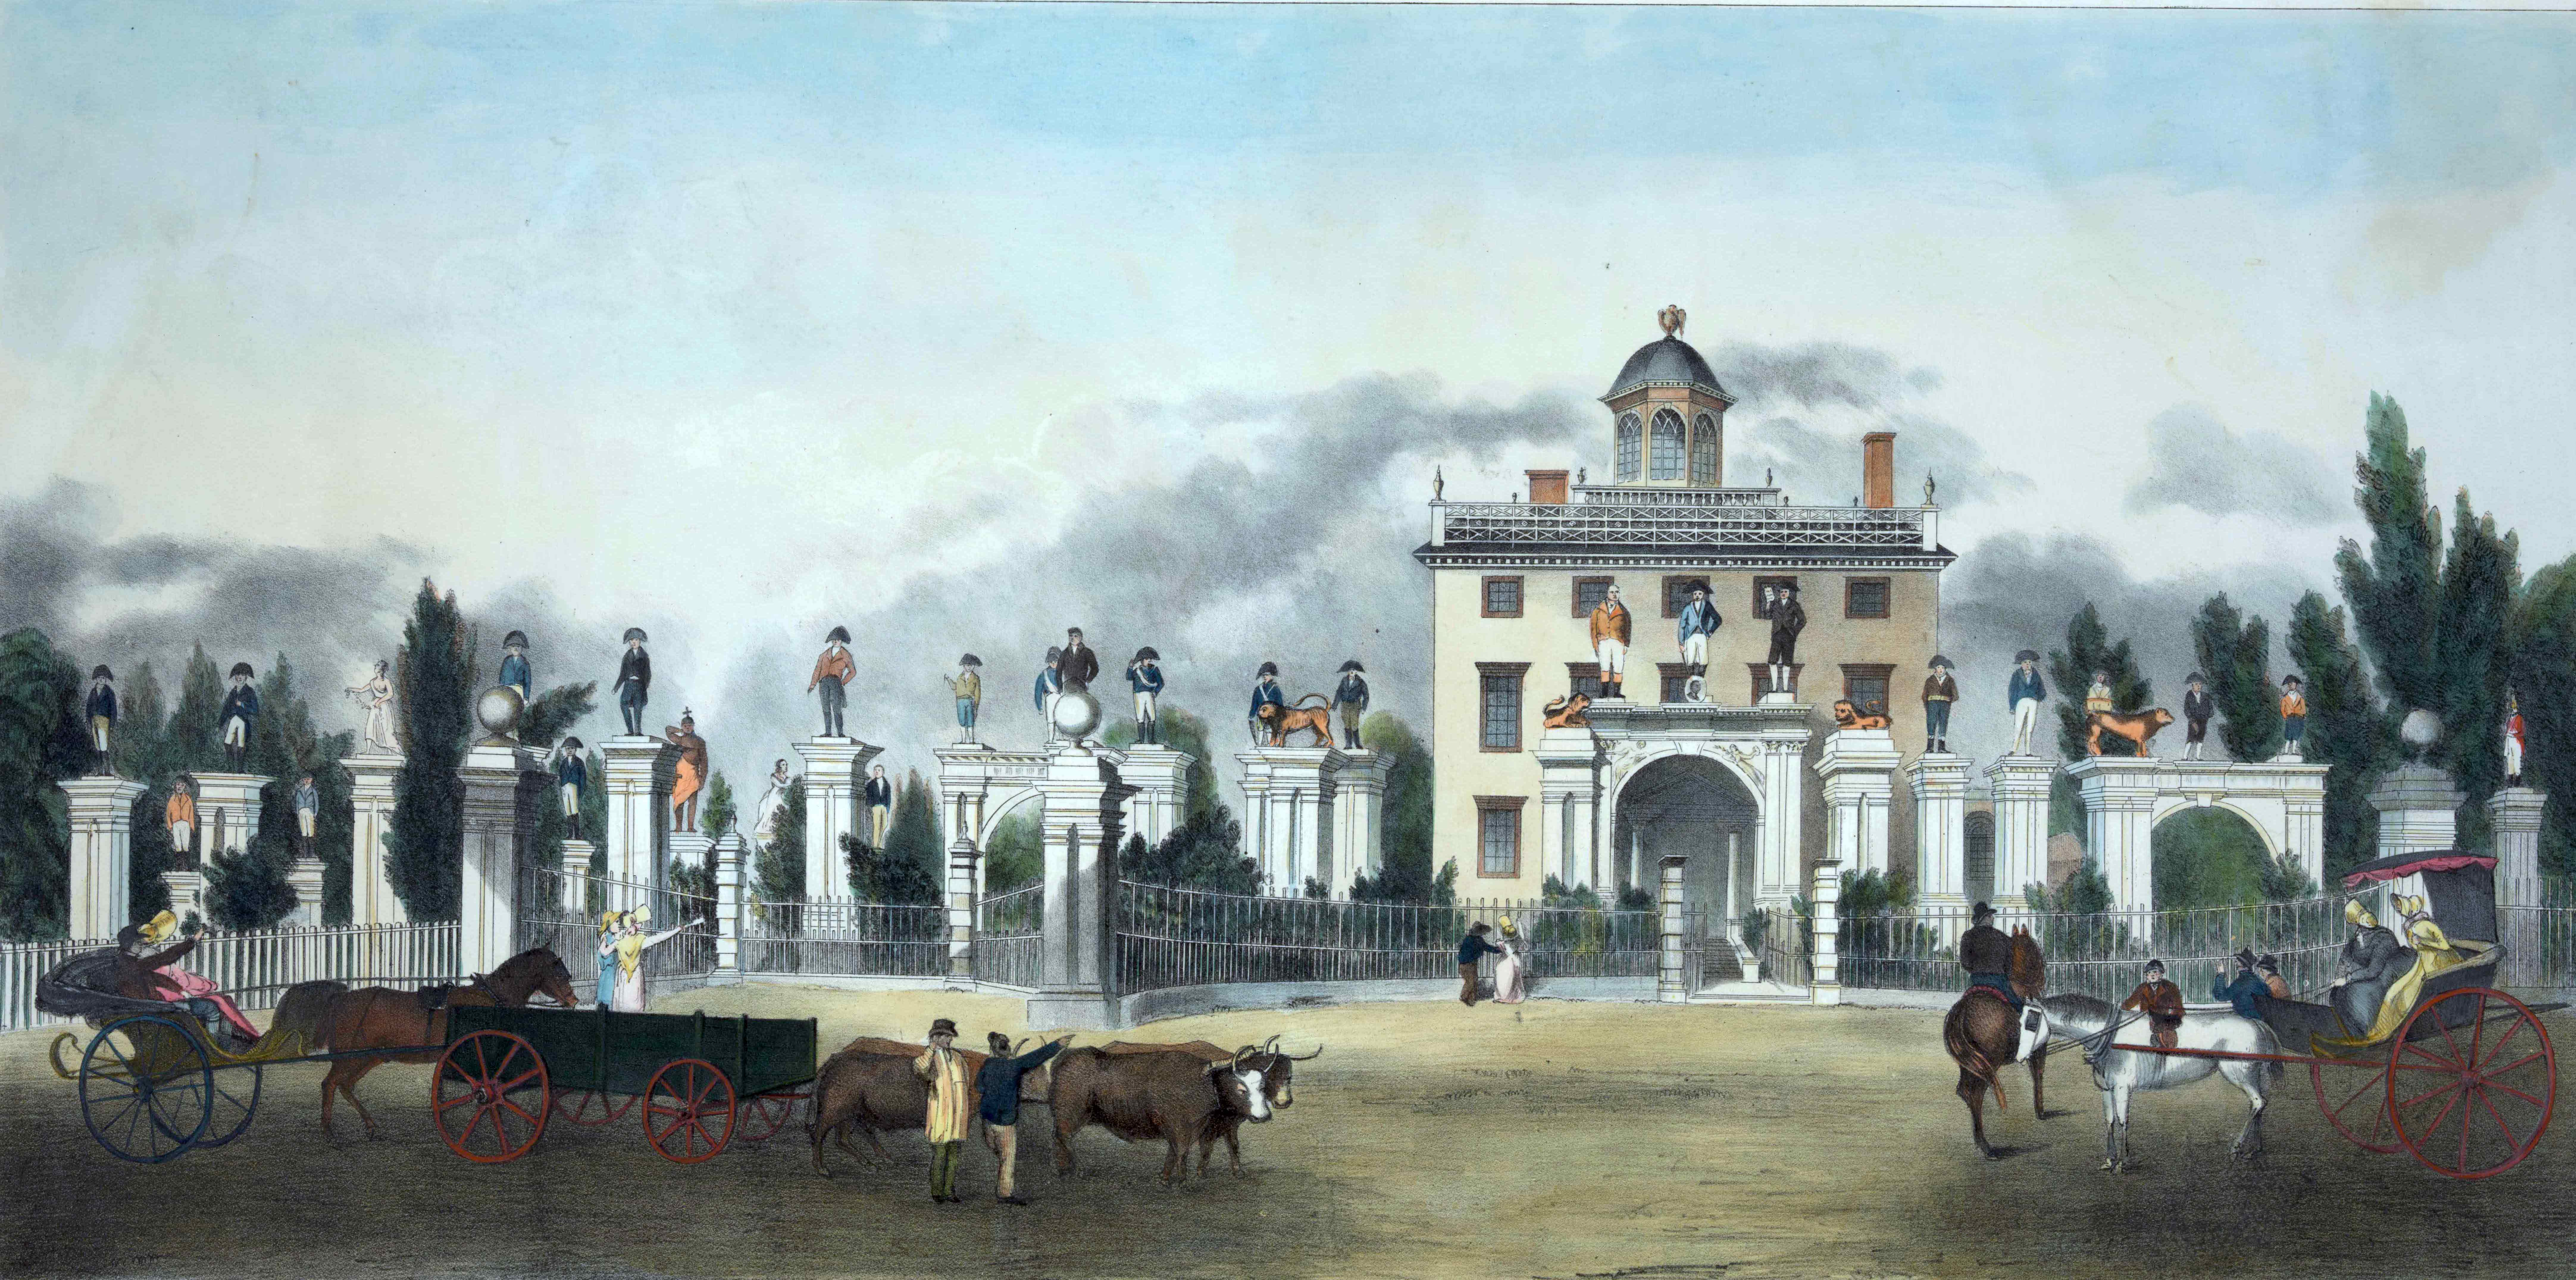 A lithograph of Dexter's mansion, featuring his decorative statues